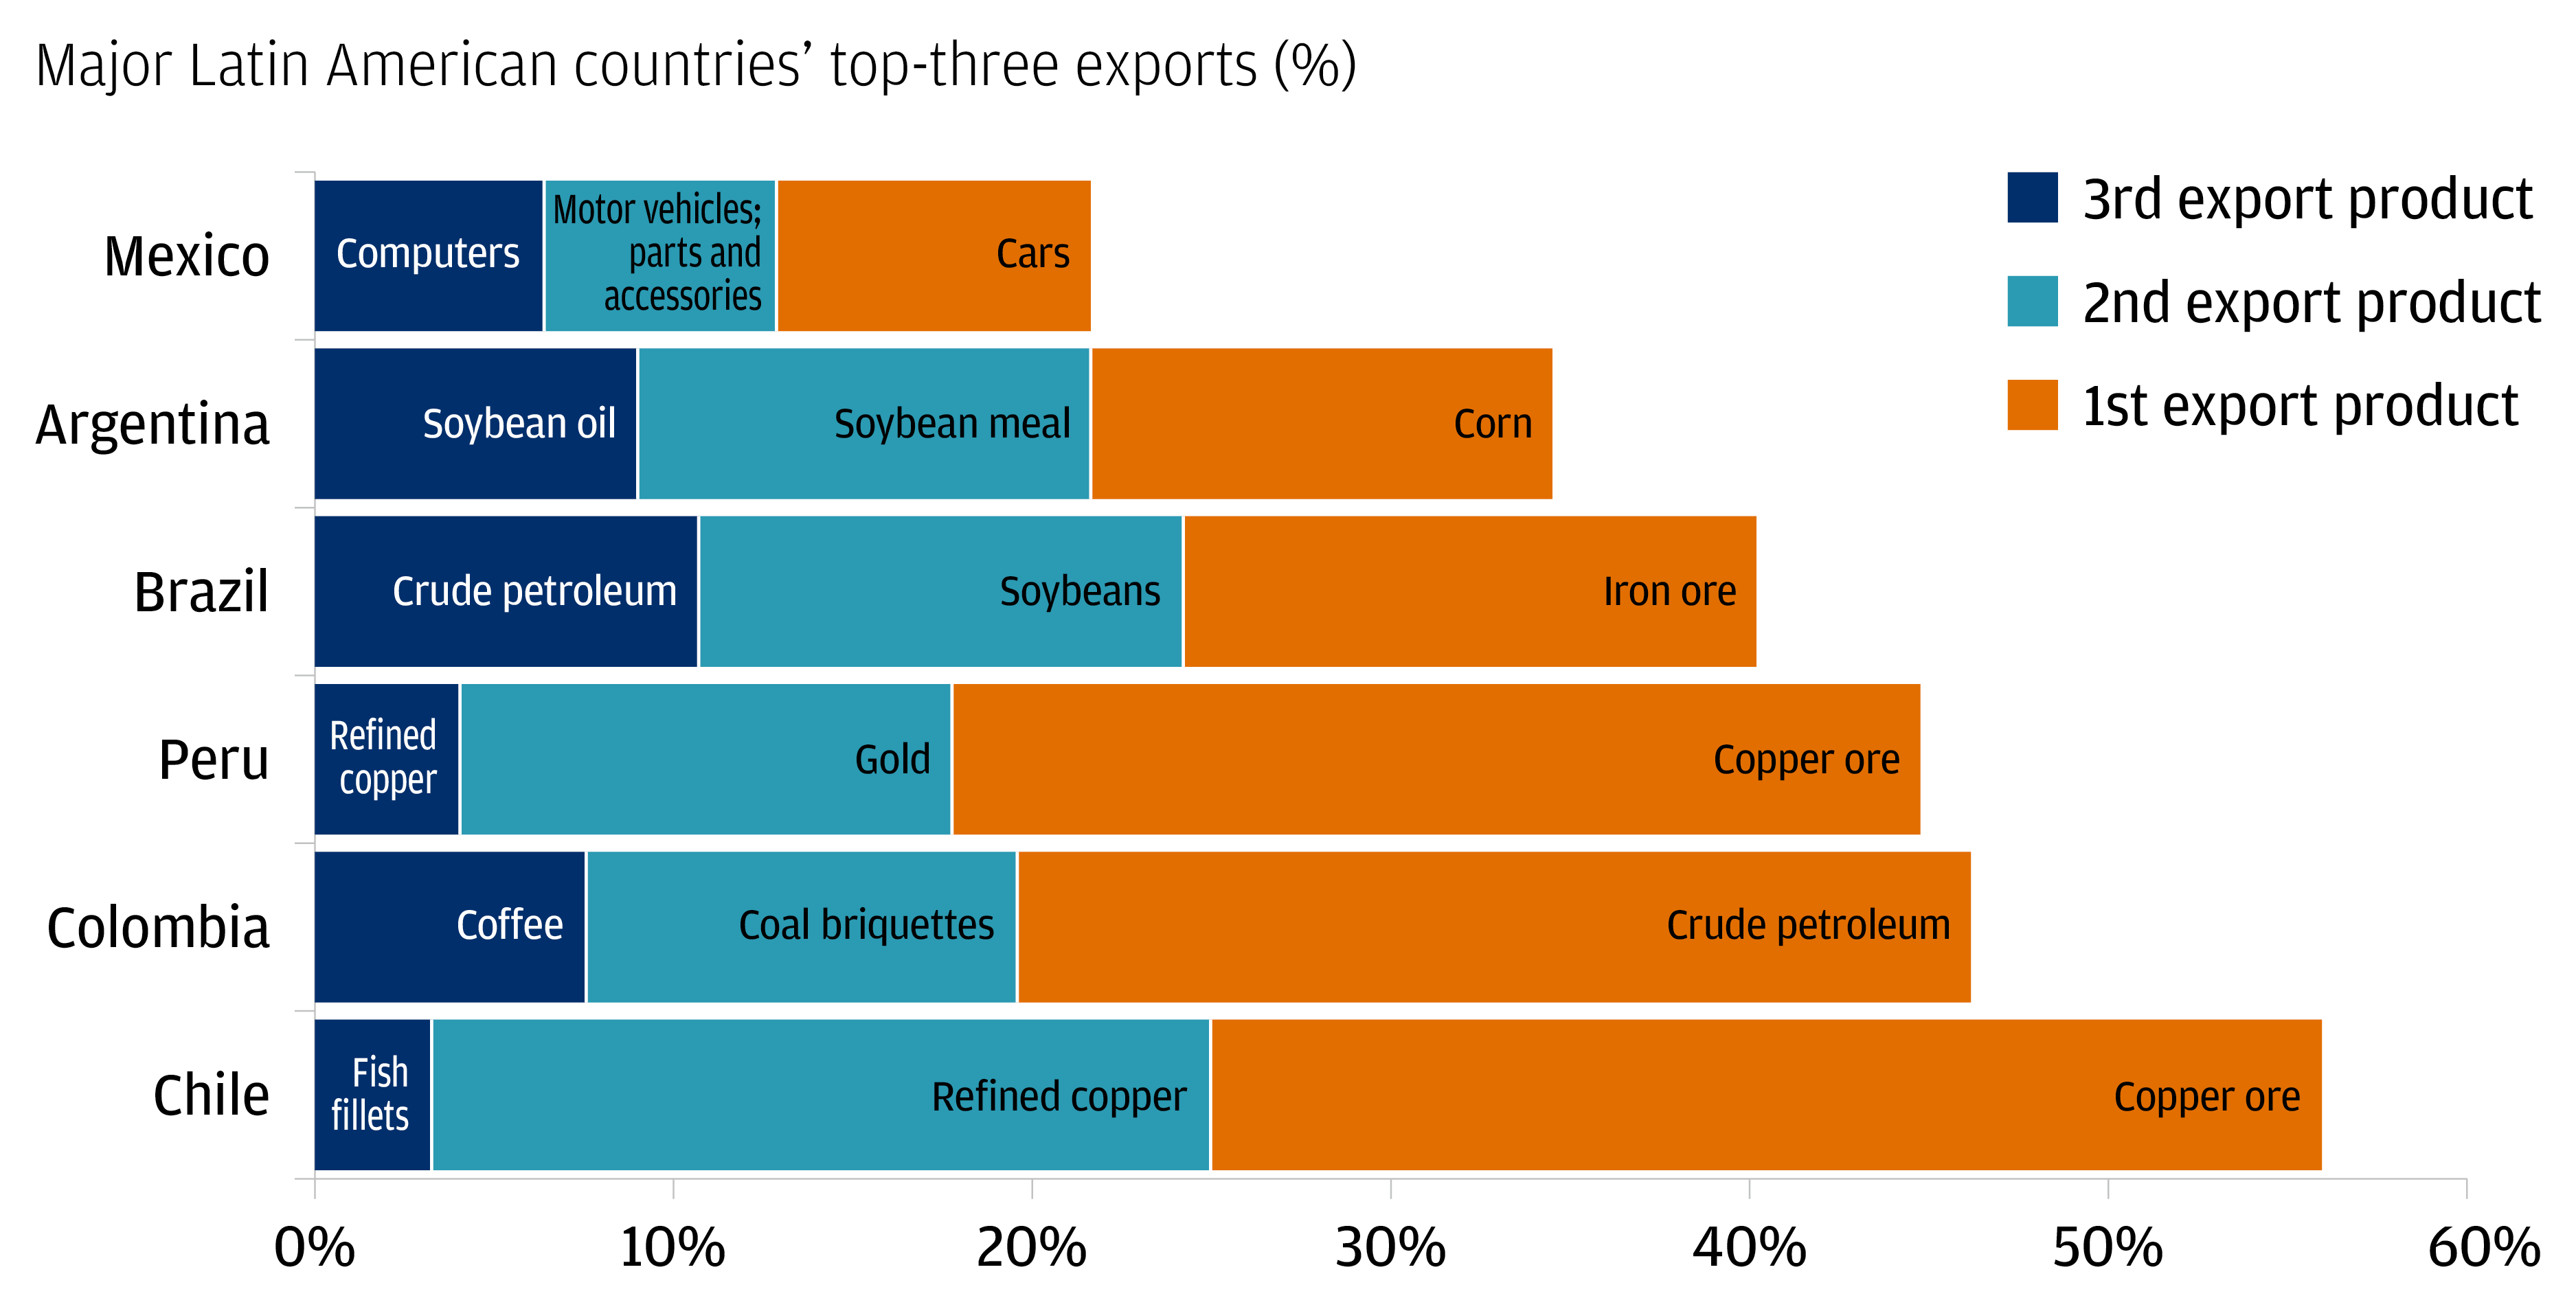 The chart describes the top 3 export products by country as % of total exports.(Mexico, Argentina, Brazil, Peru, Colombia, Chile)